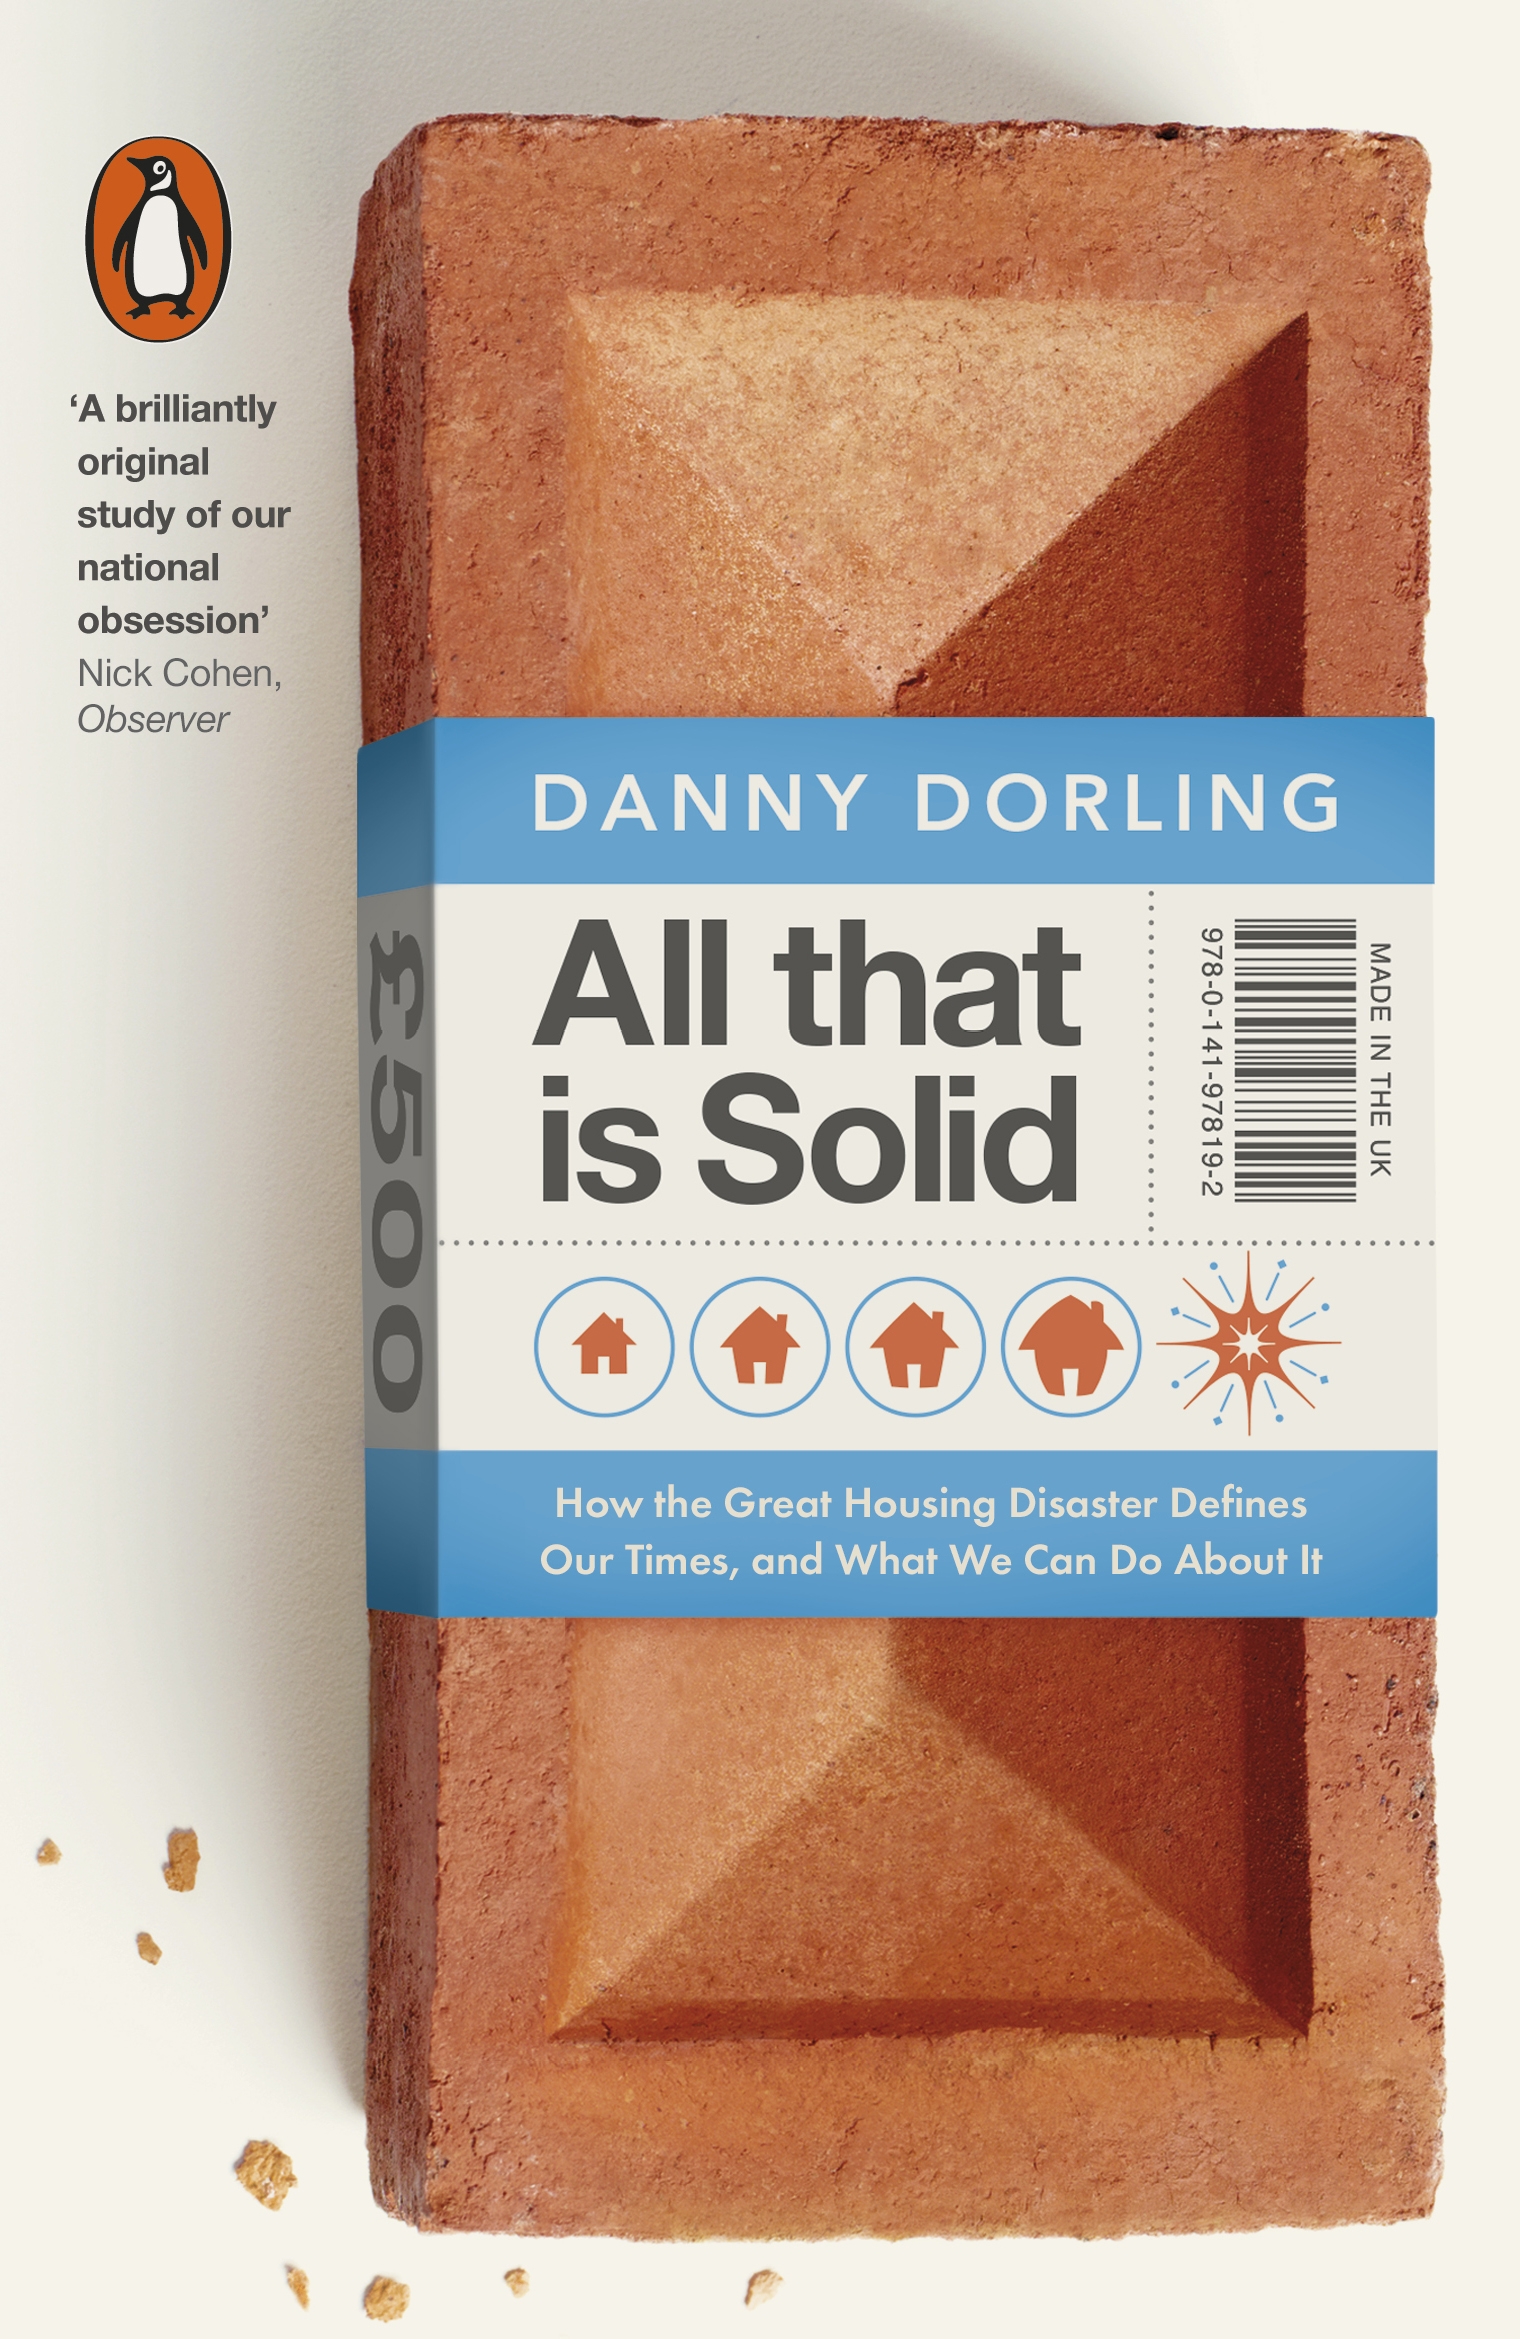 All that is solid book cover